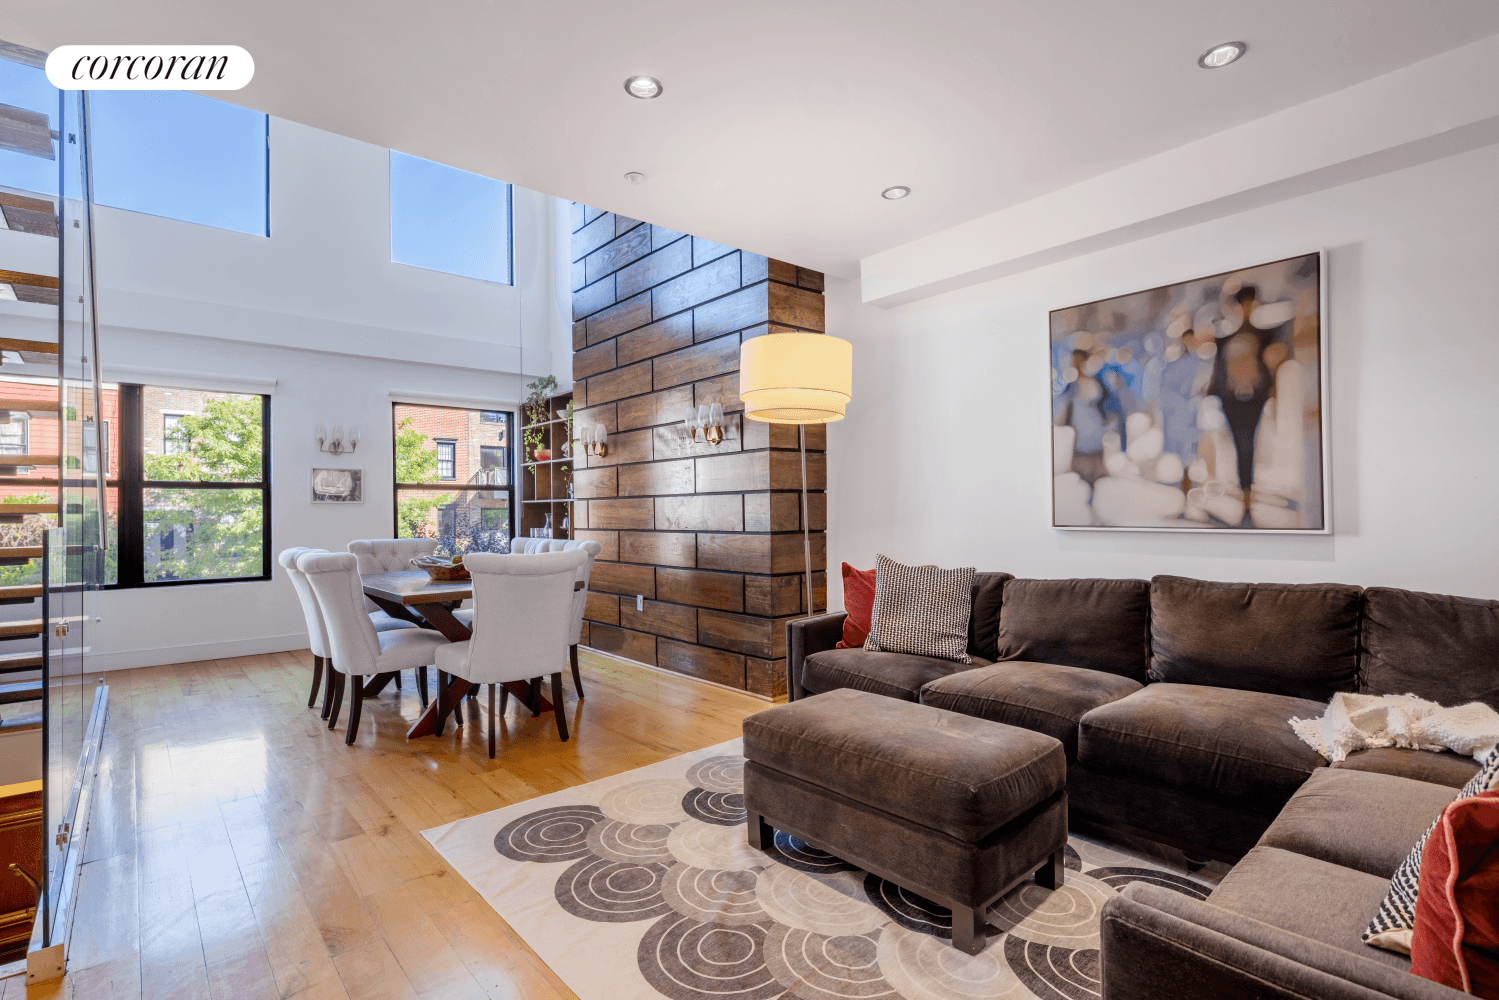 Welcome to 578 Lafayette, a modern and bright, fully renovated loft like triplex featuring 4 bedrooms and 3.